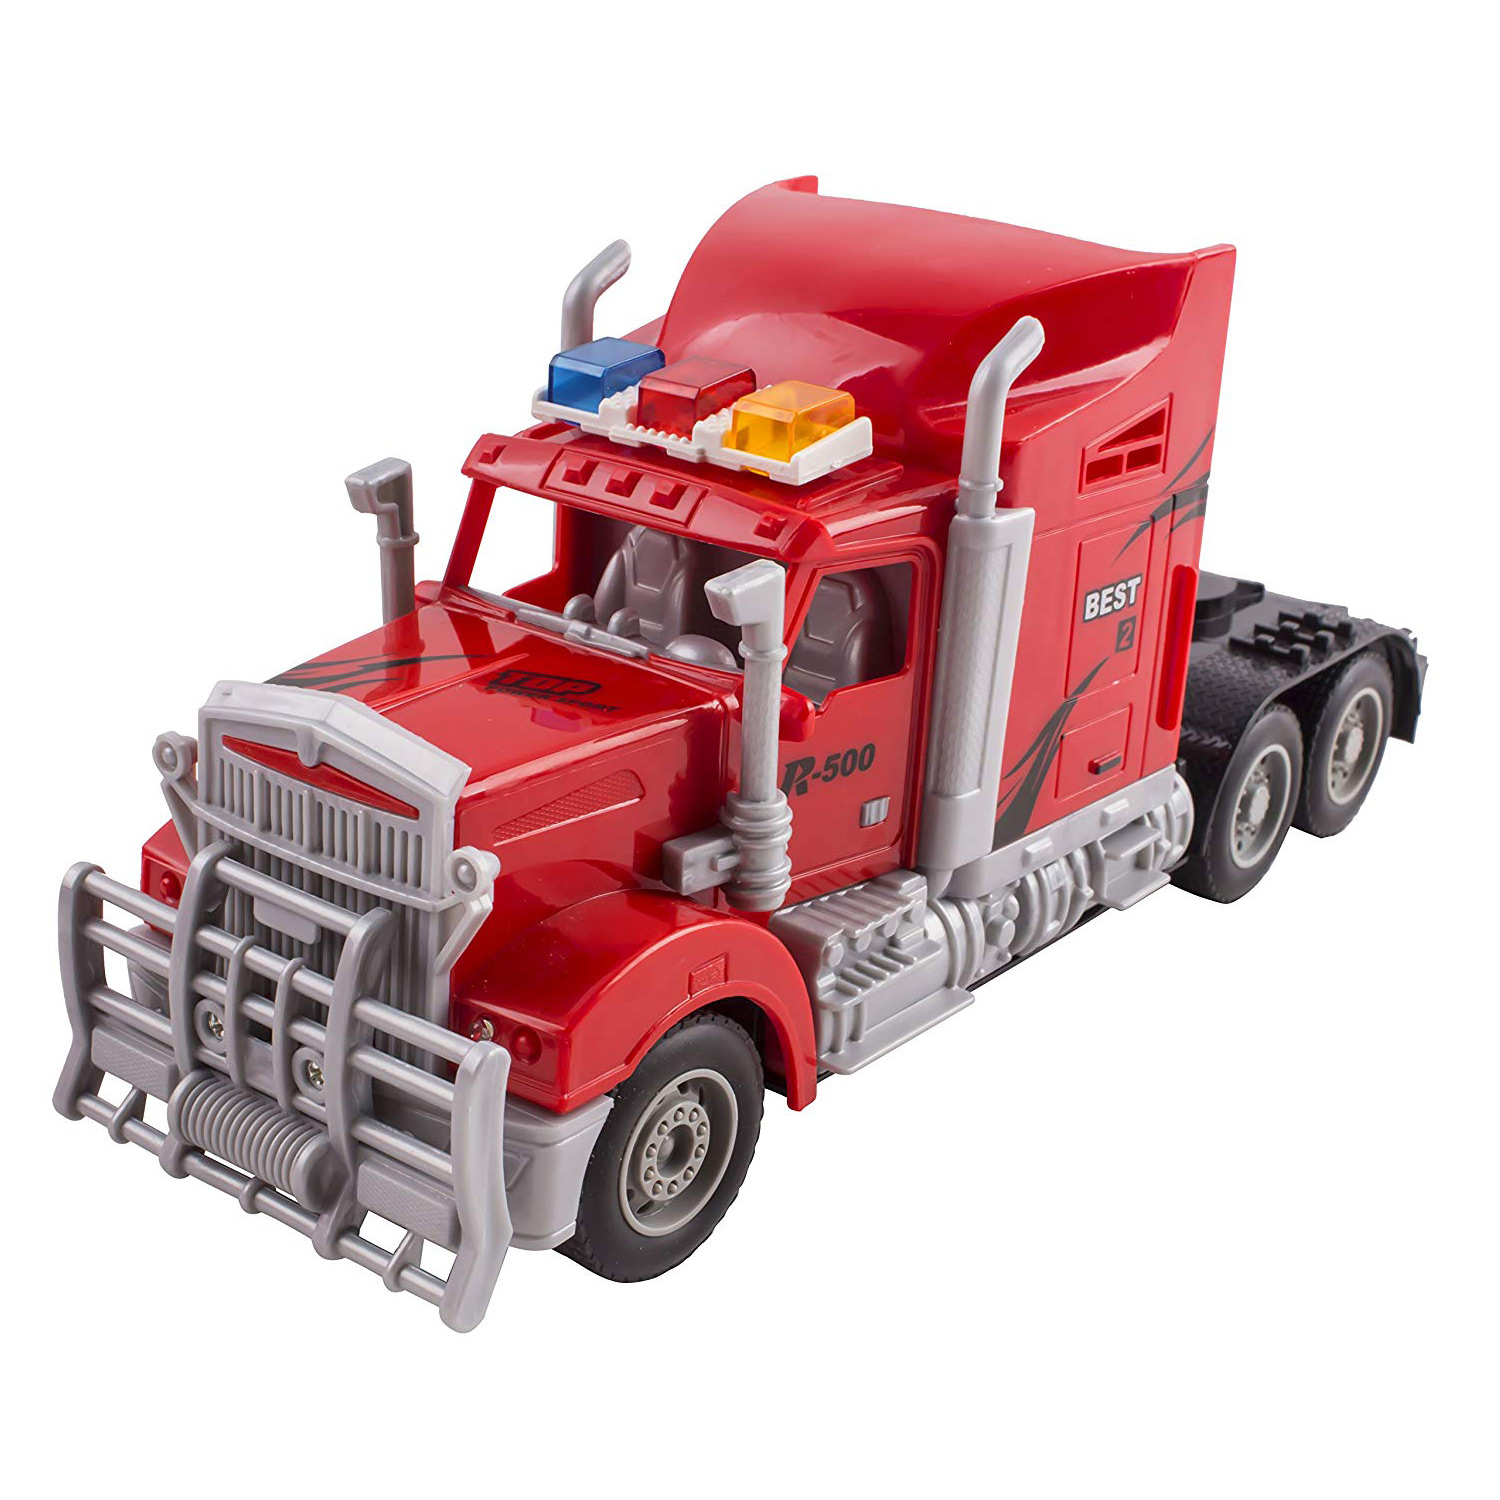 Toy Semi Truck Trailer 23 Electric Hauler Remote Control RC Childrens Transporter Ready To Run Full Cargo Perfect Big Rig For Kids Toys Red 9070-21E